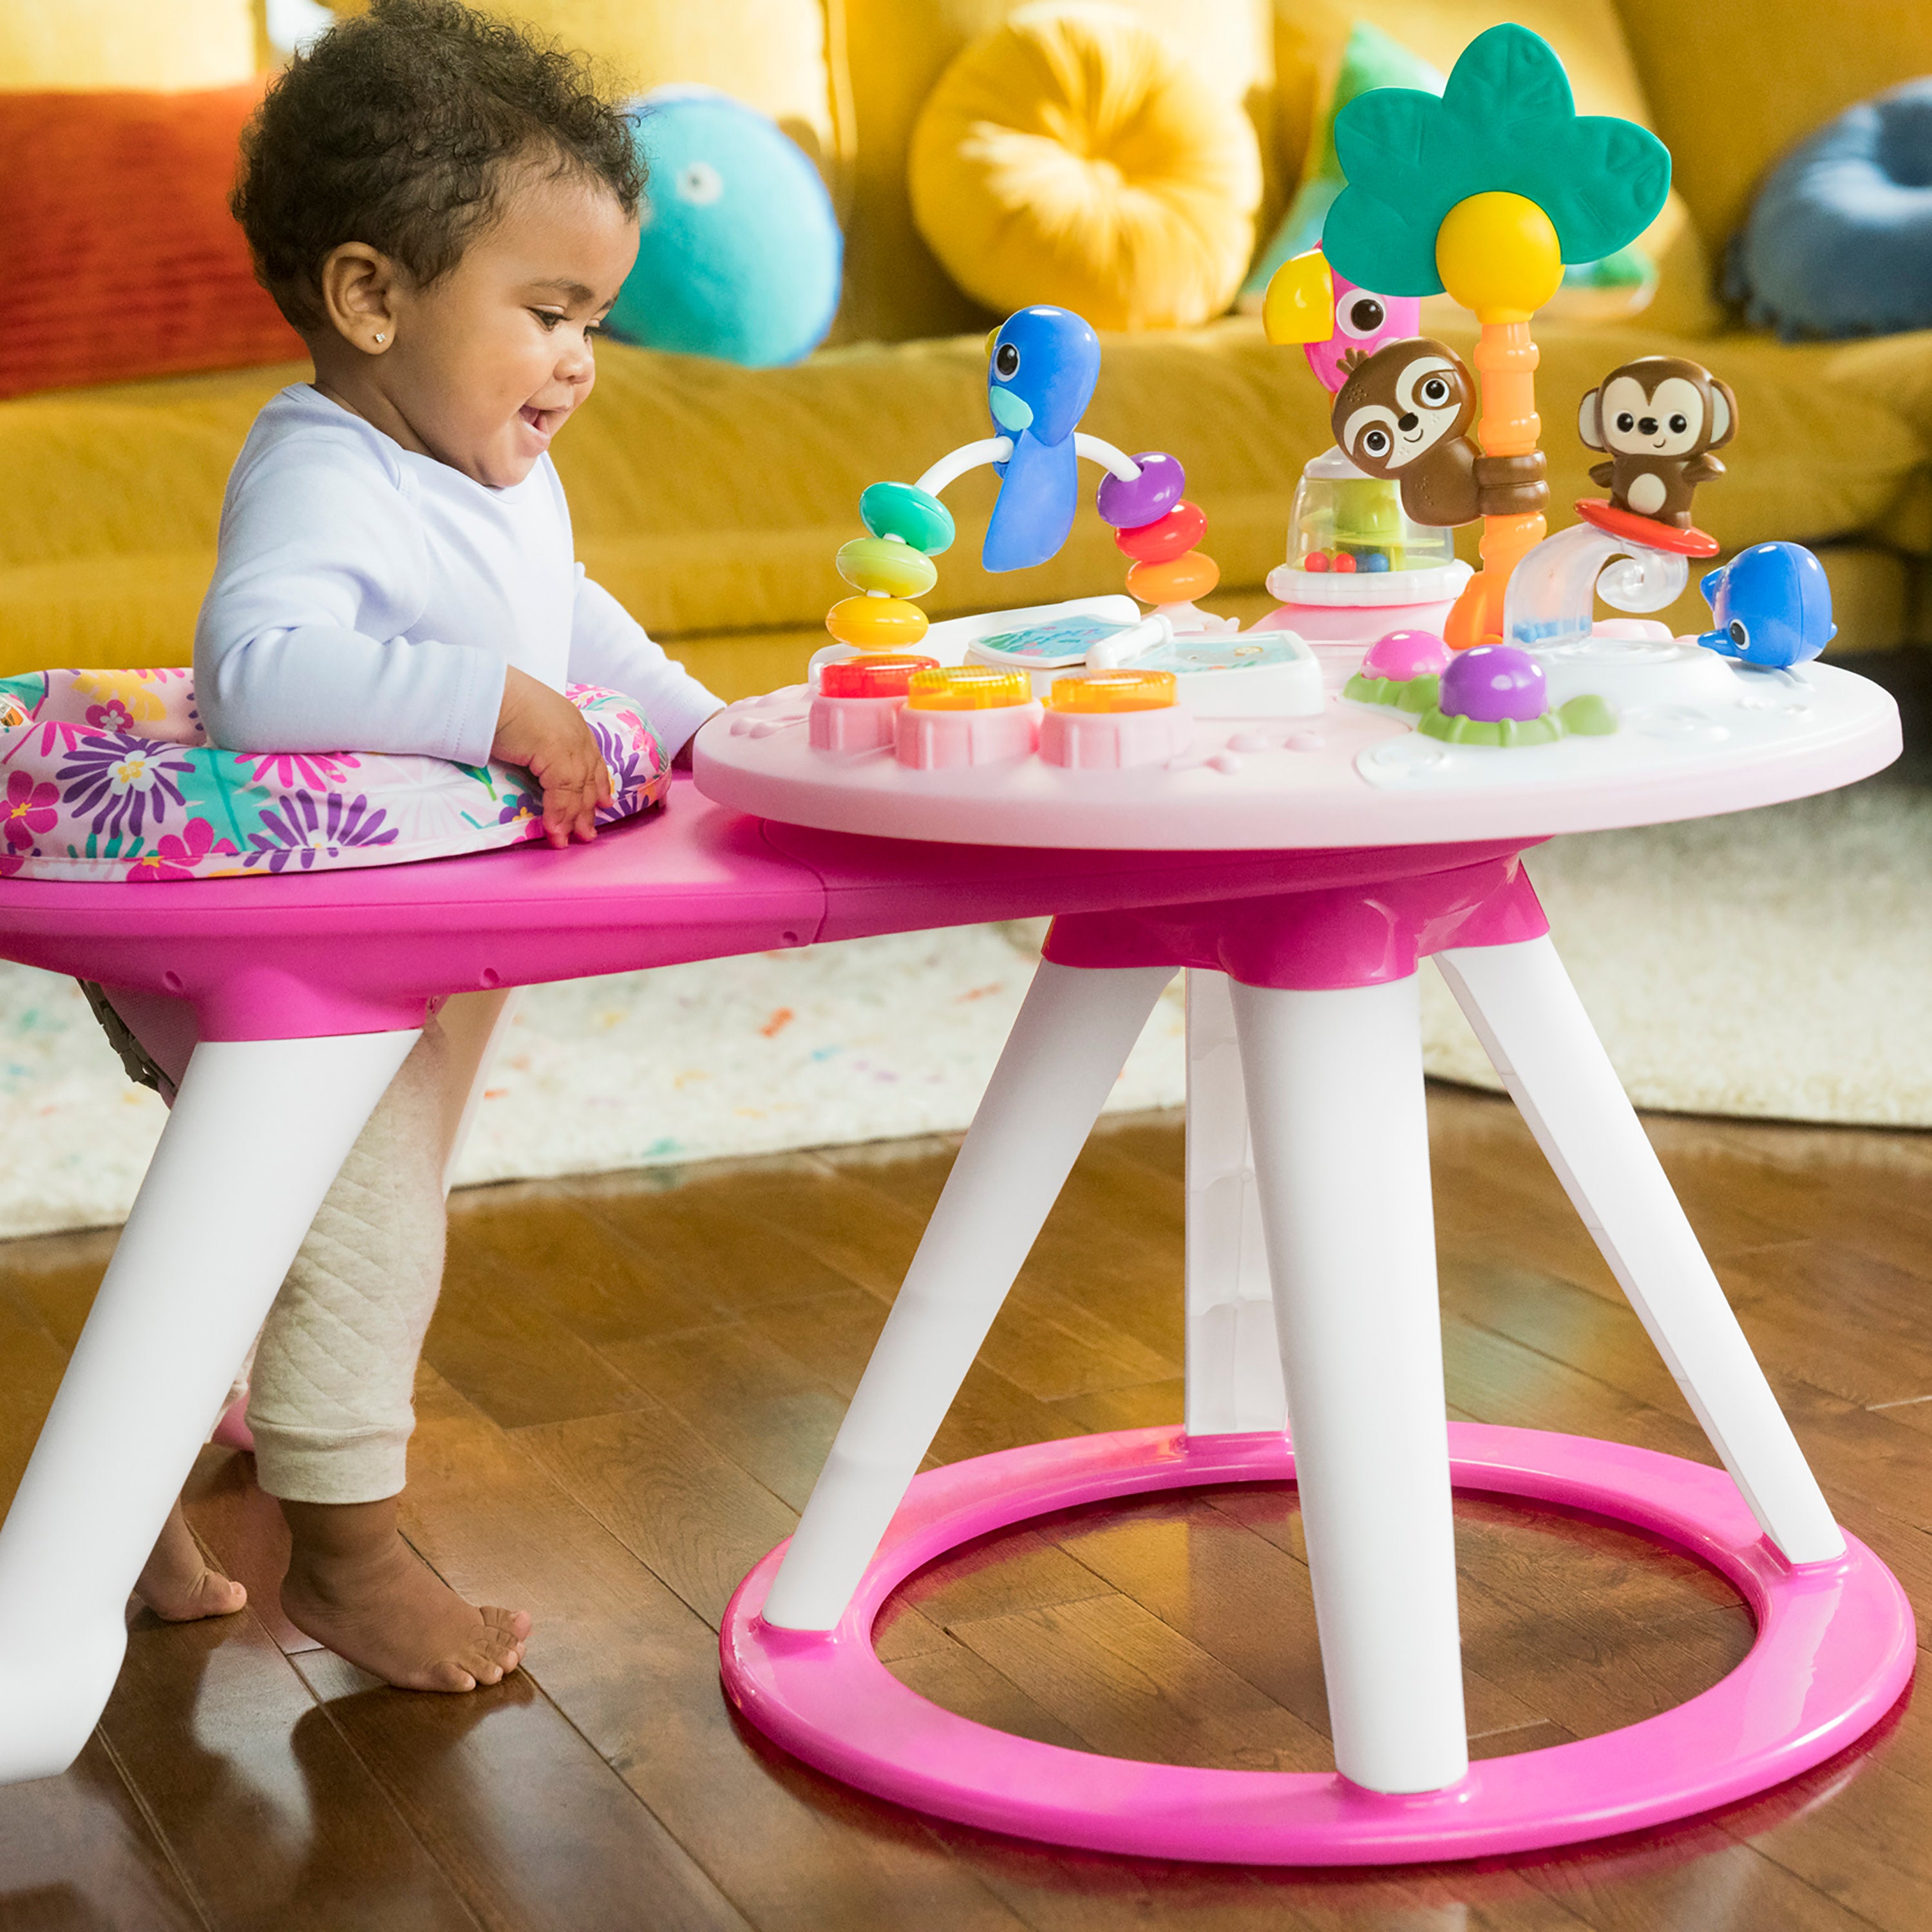 Bright Starts, Around We Go 2-in-1 Walk-Around Activity Centre and Play  Table - Tropic Cool, Walker with Music, Lights and Interactive Toys,  Removable